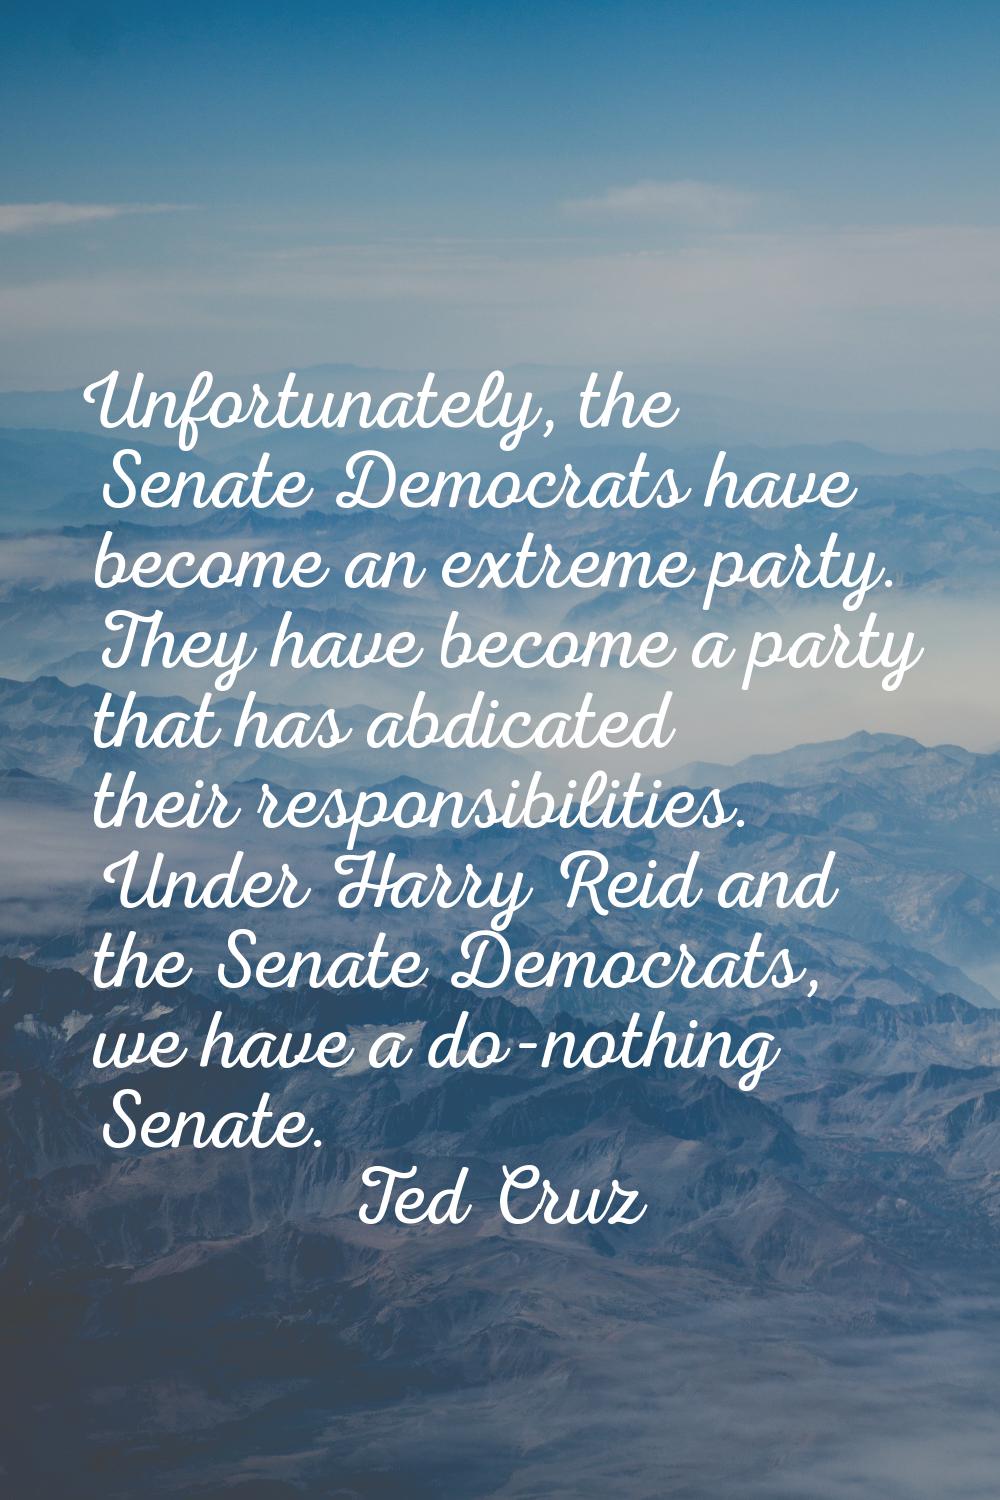 Unfortunately, the Senate Democrats have become an extreme party. They have become a party that has